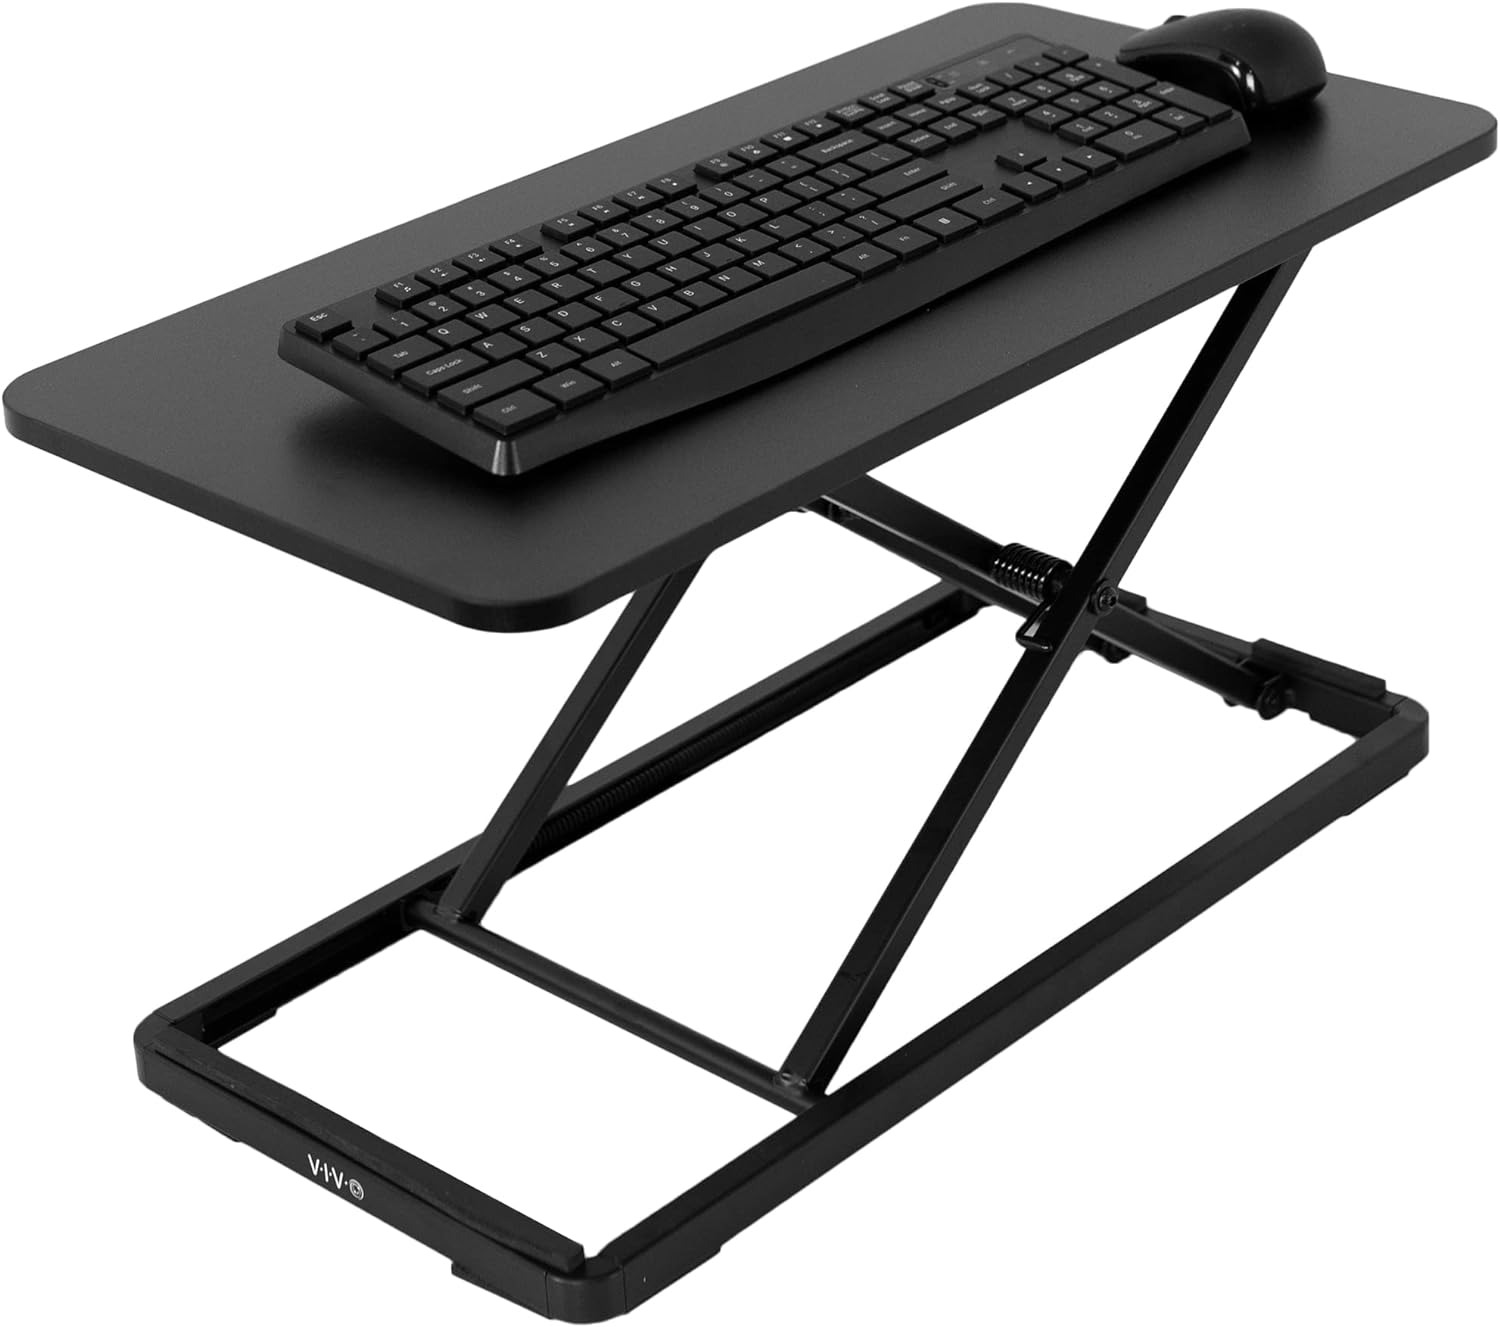 VIVO Single Top 24 Inch Scissors Lift Keyboard and Mouse Riser, Height Adjustabl